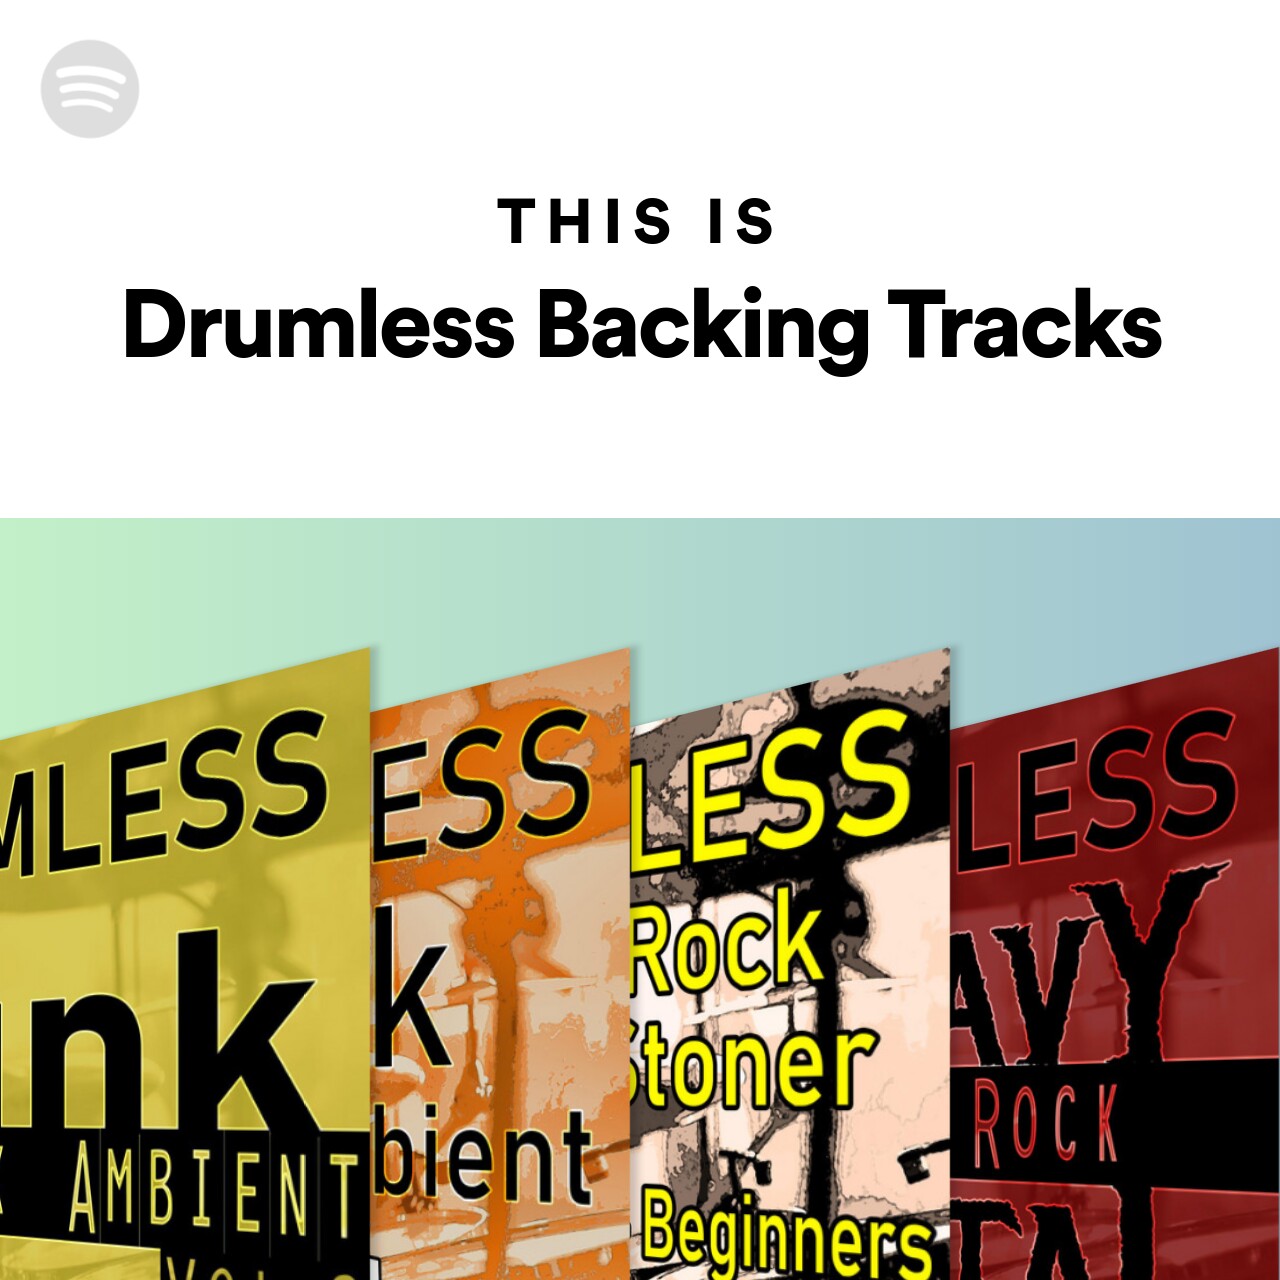 This Is Drumless Backing Tracks